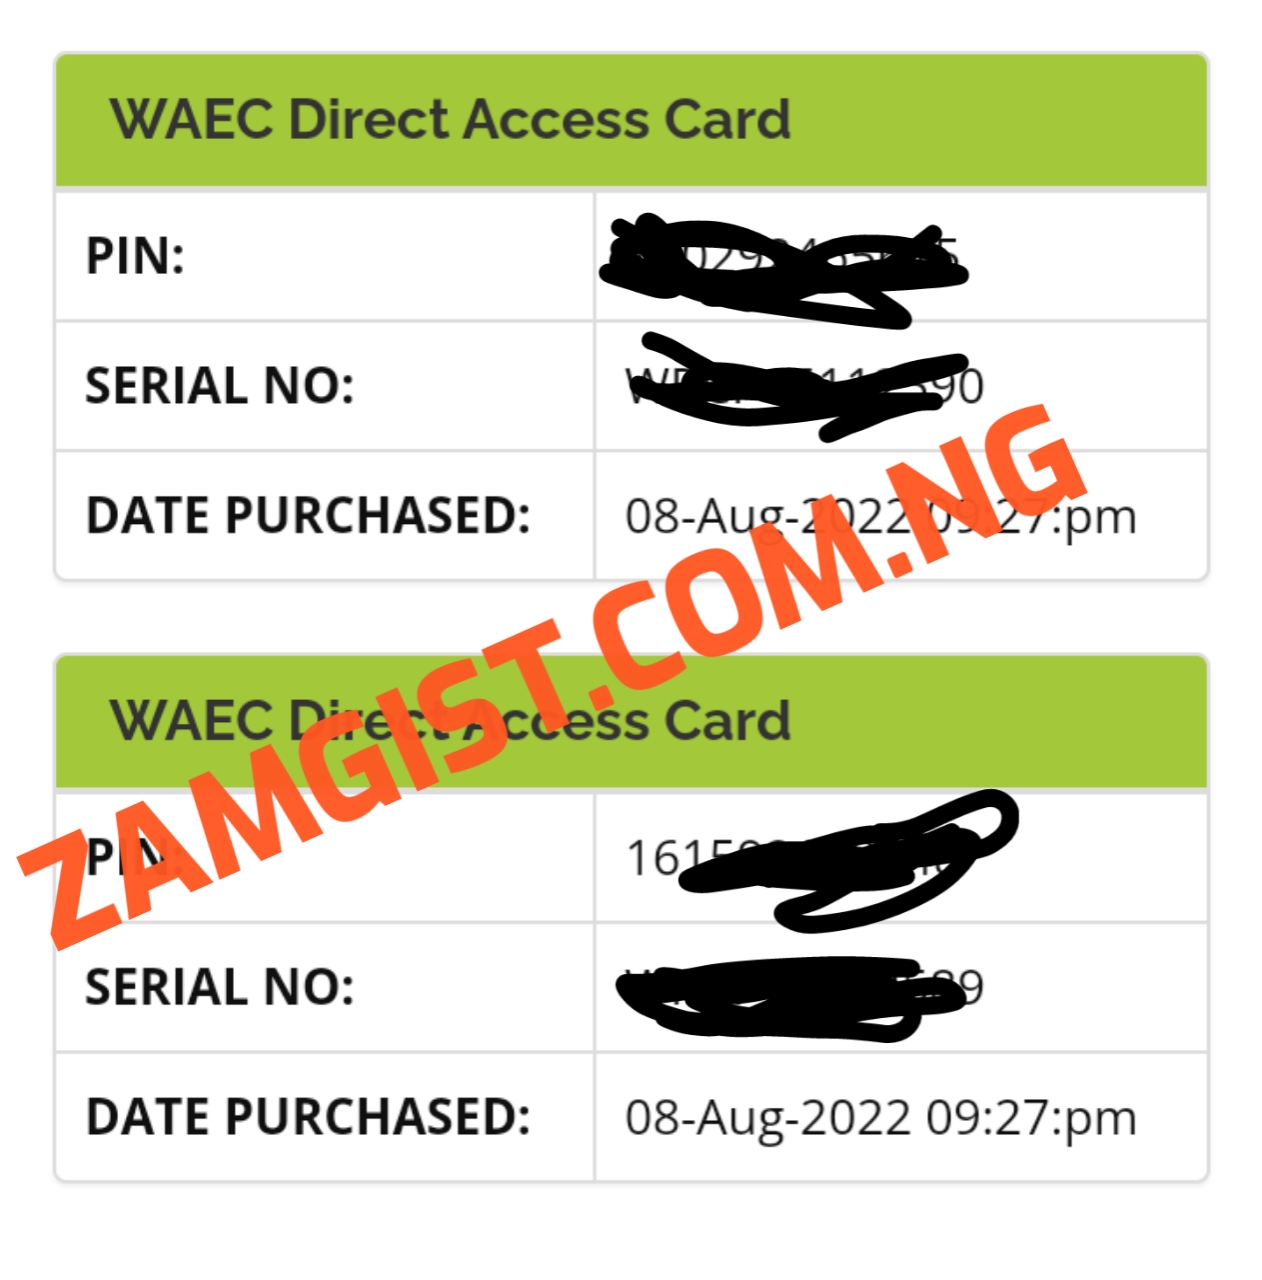 How to buy WAEC scratch card online at heaper rate